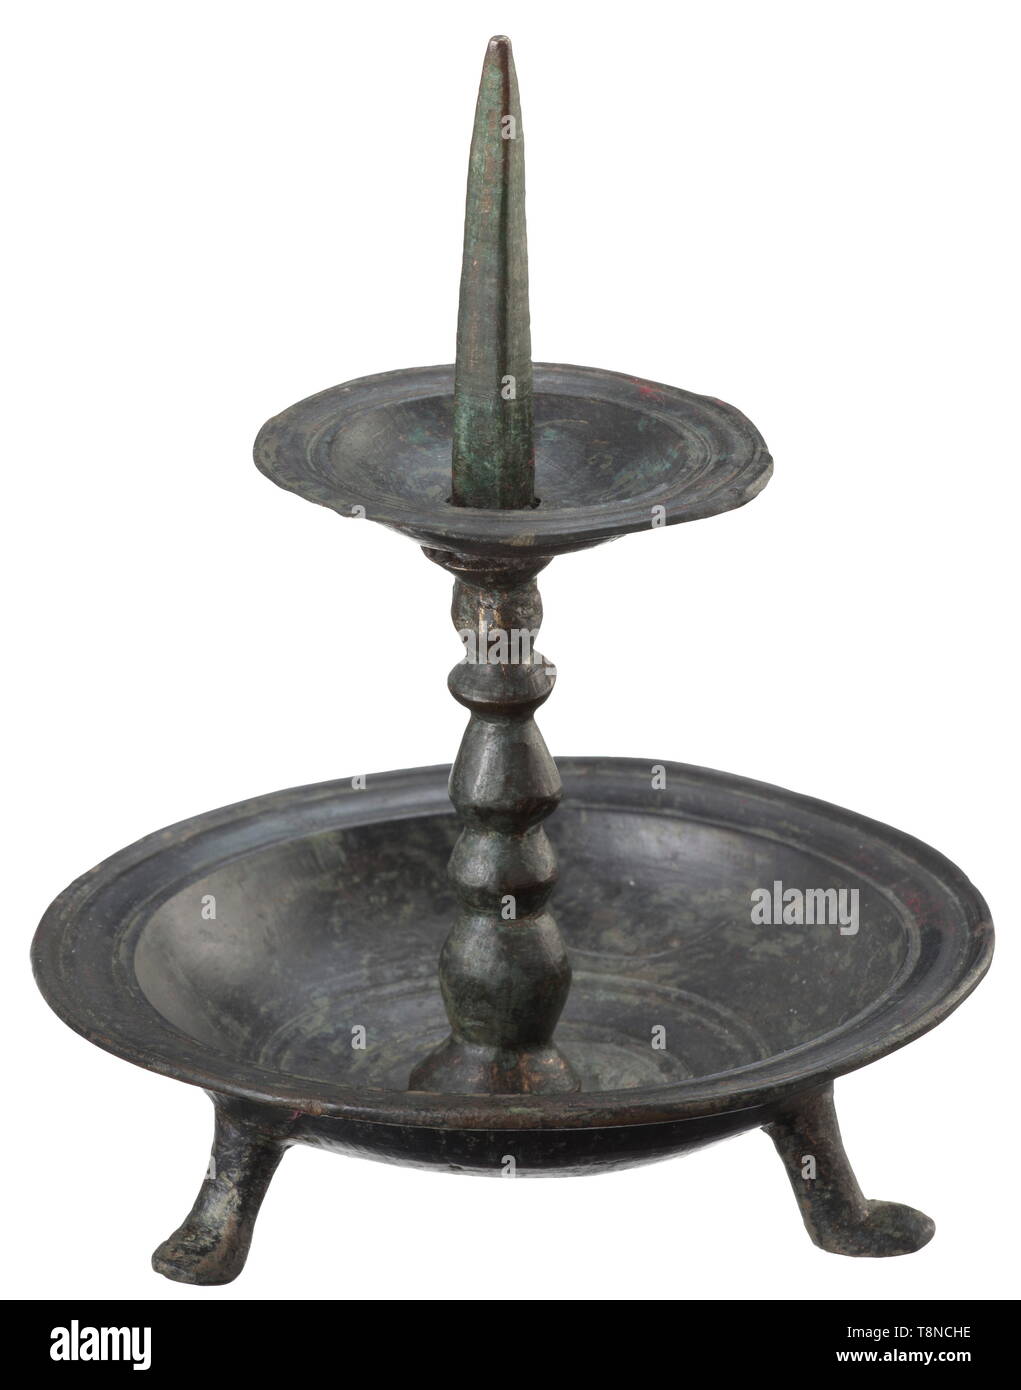 A Romanesque pricket candleholder, Lower Rhine region, 10th/11th century Bronze with fine greenish patina. Candleholder made of several pieces with a bowl-shaped base on three small feet. Baluster shaft with drip pan and pricket of square section. Height 14 cm. historic, historical, handicrafts, handcraft, craft, object, objects, stills, clipping, clippings, cut out, cut-out, cut-outs, middle ages, Additional-Rights-Clearance-Info-Not-Available Stock Photo